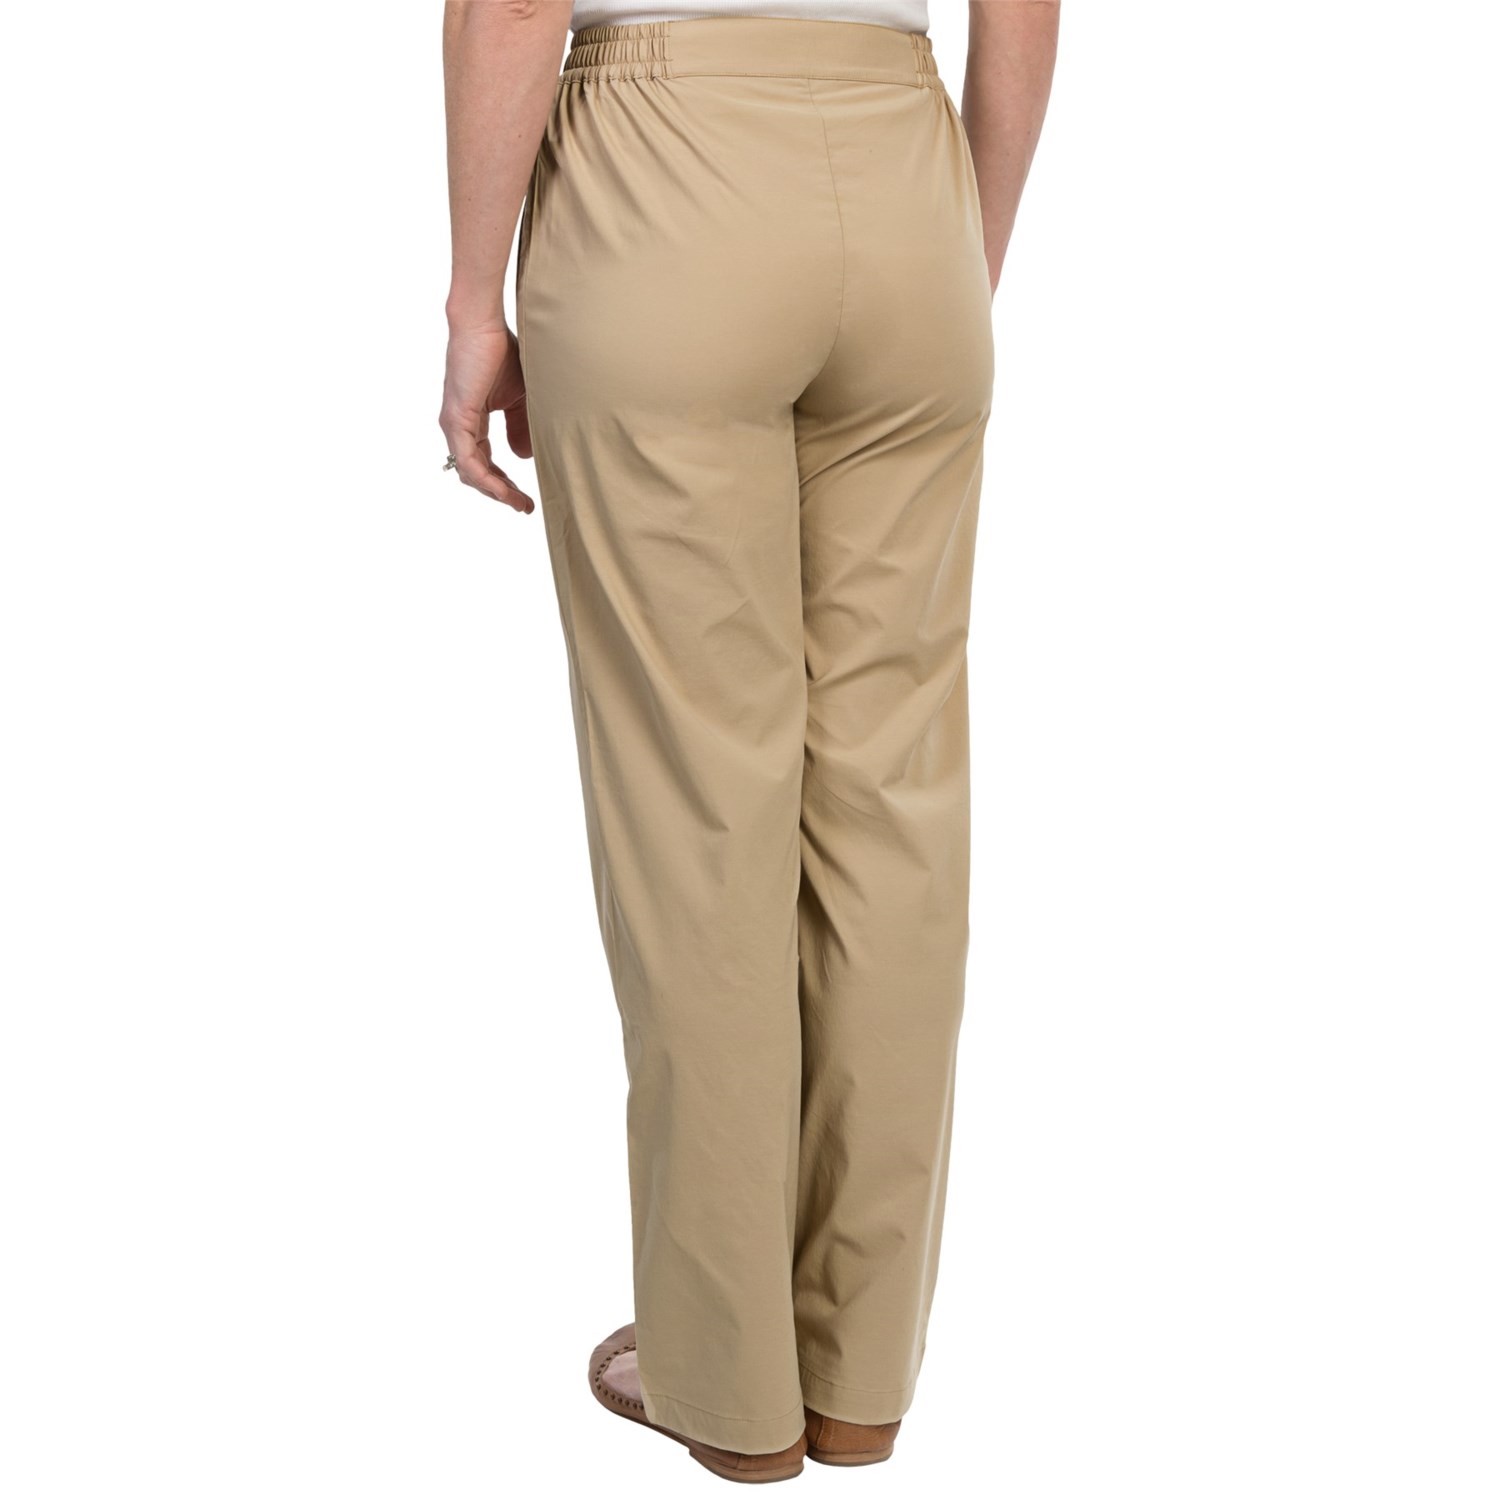 Sportif USA Easy Travel Stretch Pants (For Women) 7072T - Save 93%